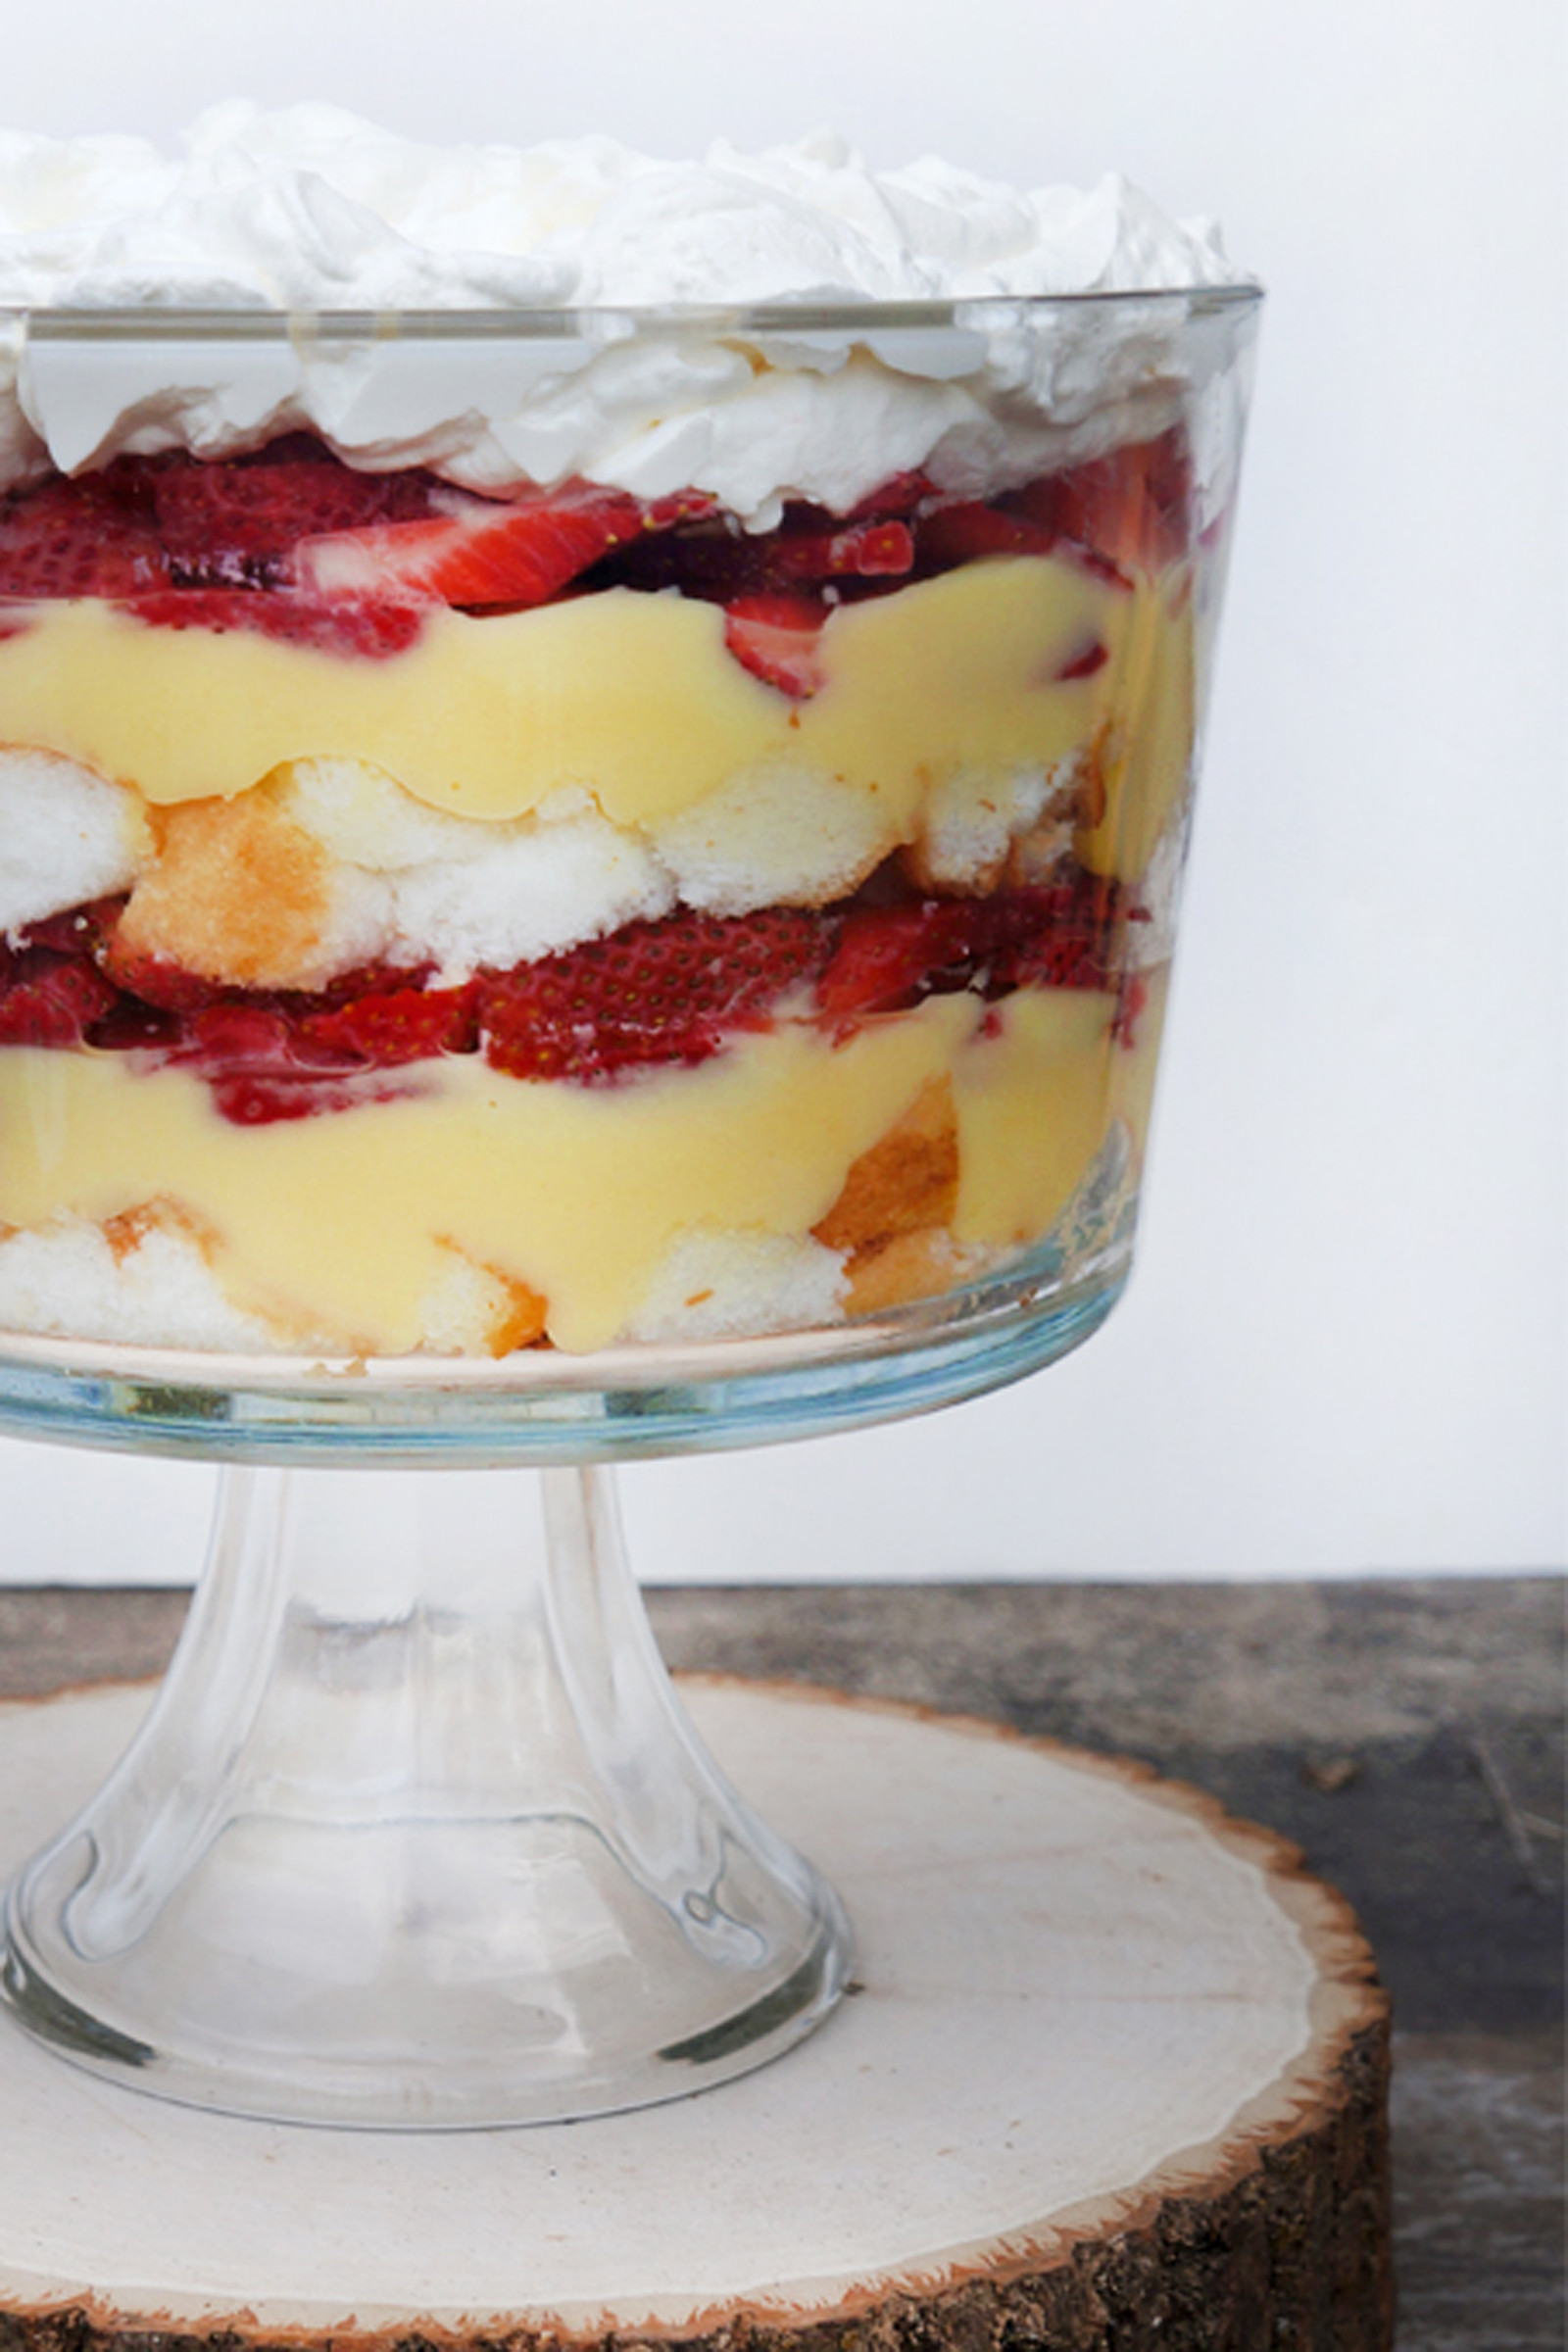 Summer Trifle Desserts
 12 Easy Summer Trifle Recipes That Will Be the Star of